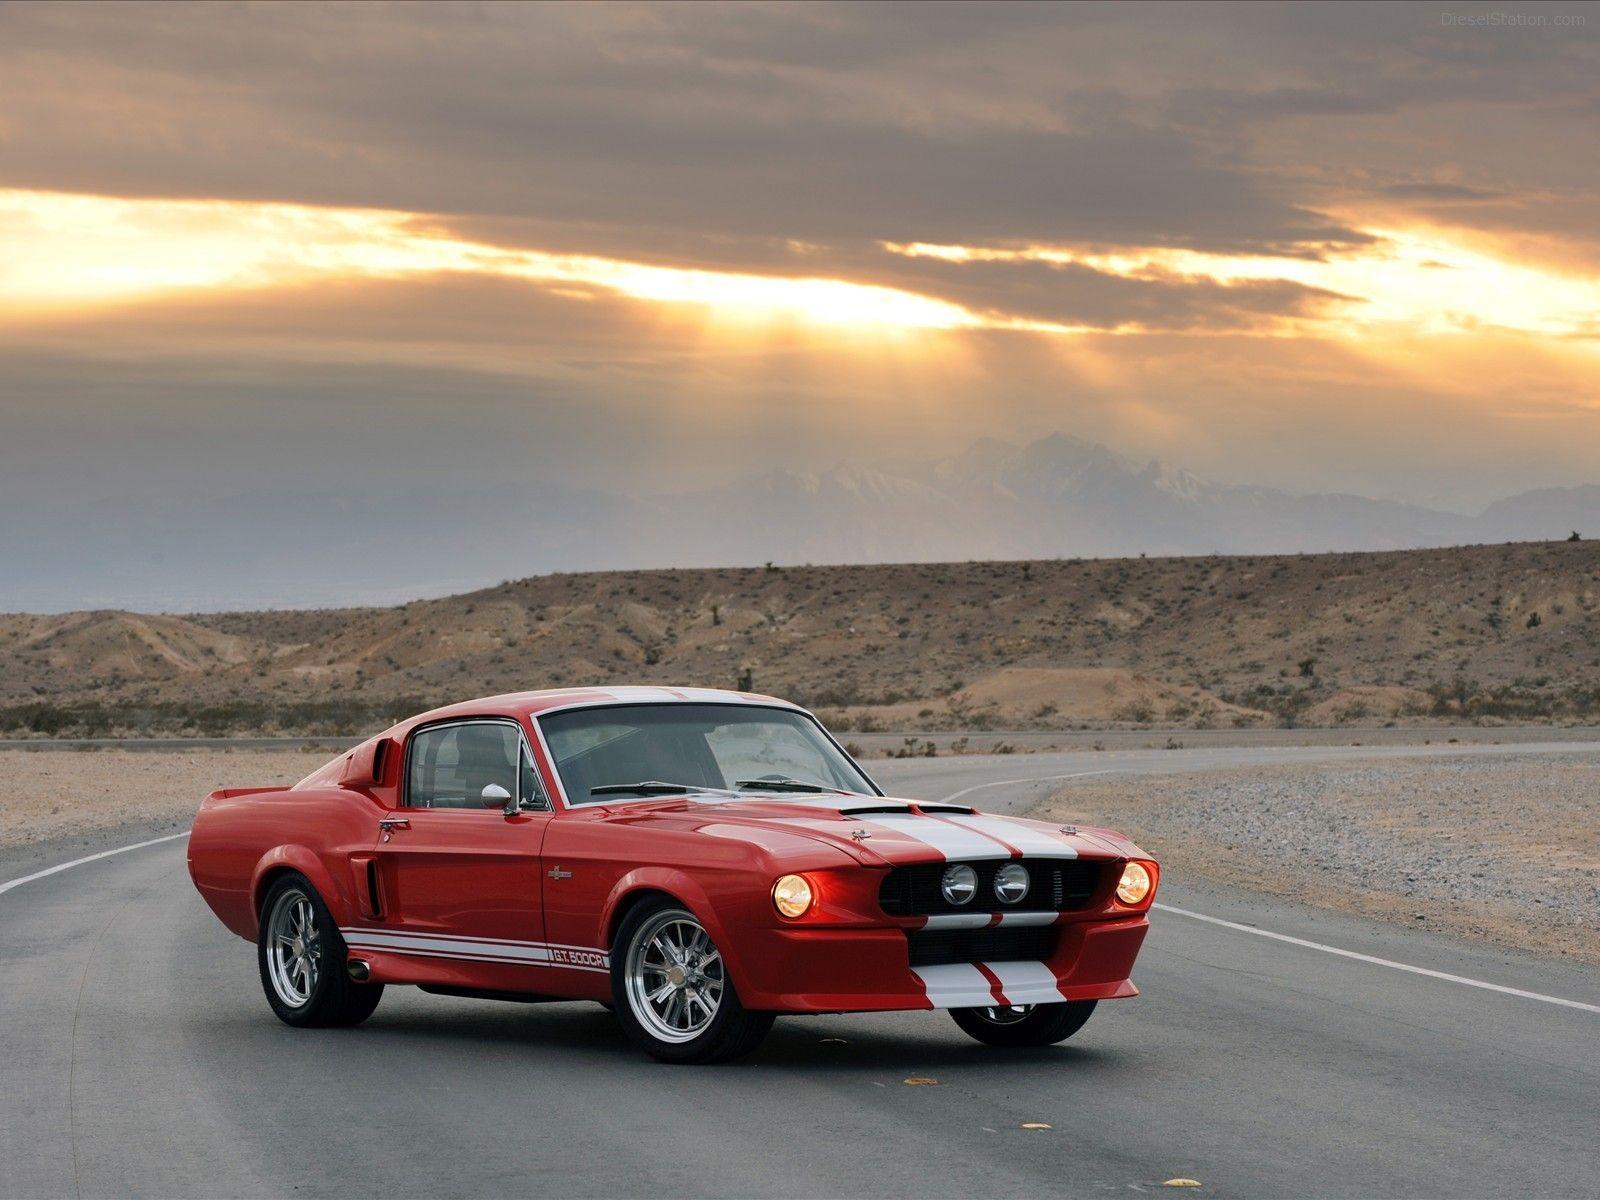 Mustang Fastback Shelby GT500CR 1967 Exotic Car Wallpaper